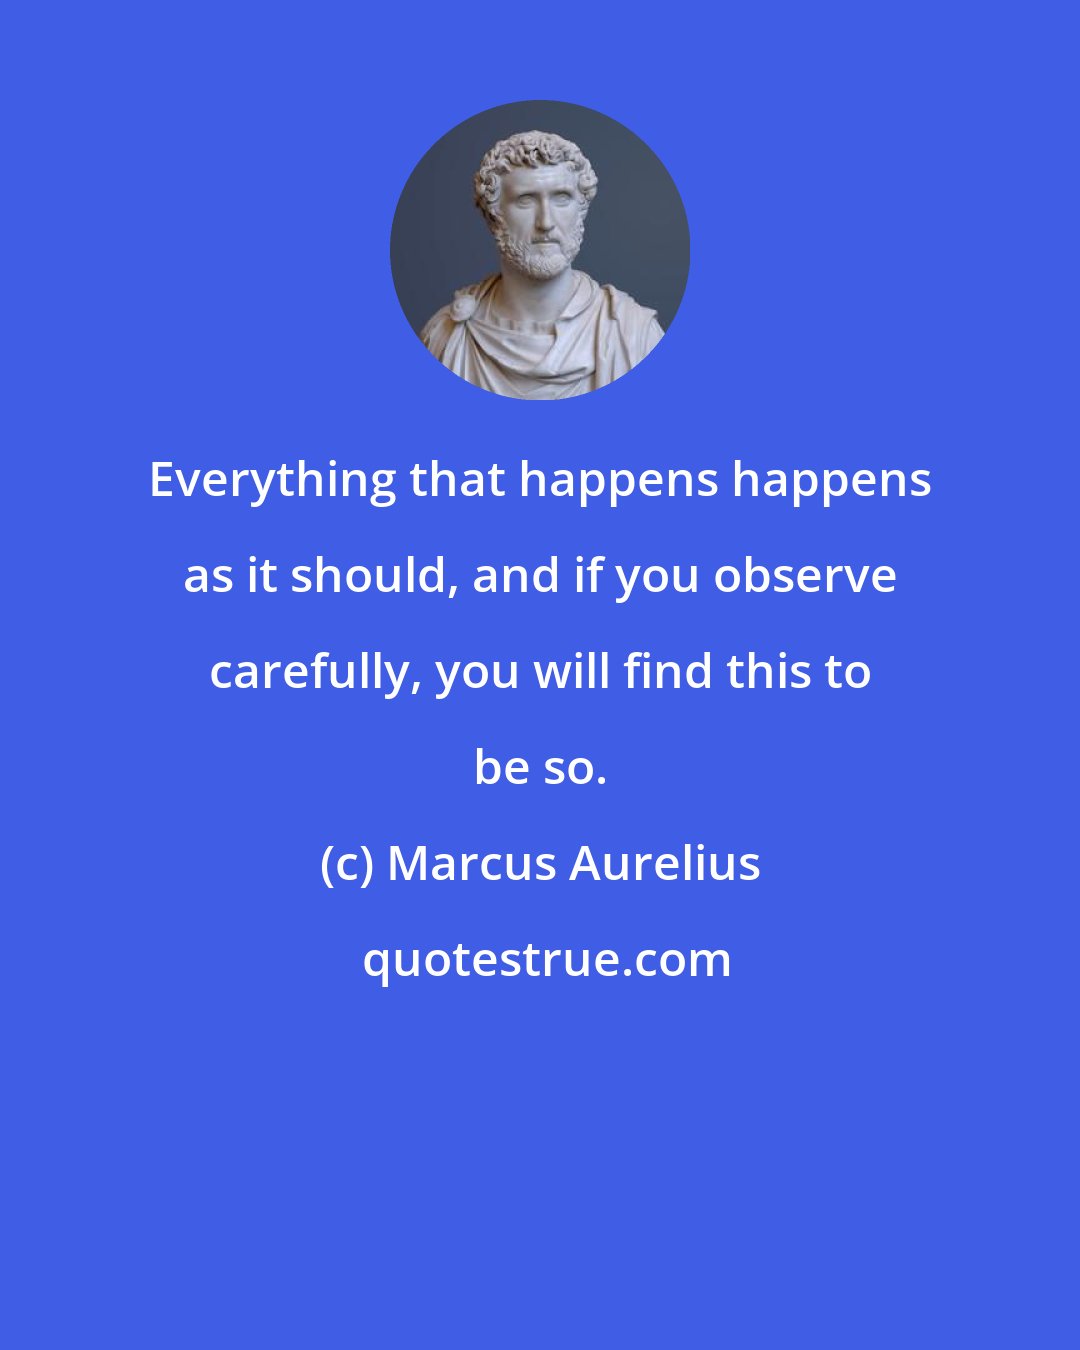 Marcus Aurelius: Everything that happens happens as it should, and if you observe carefully, you will find this to be so.